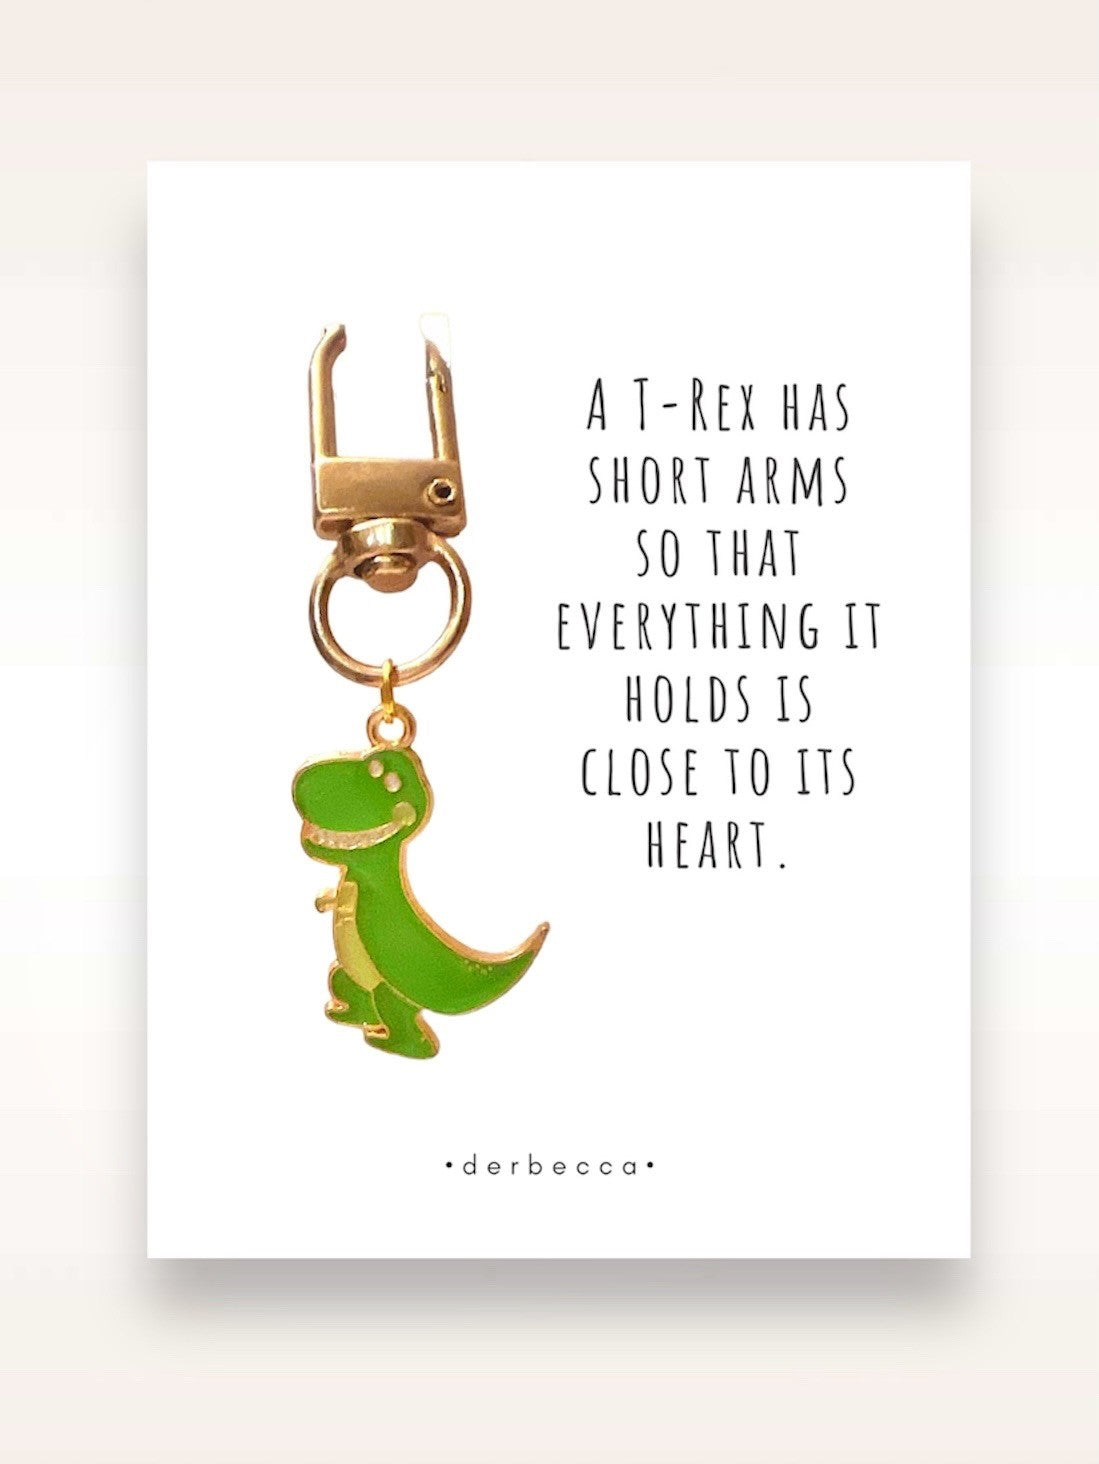 T-Rex Dinosaur Mini Keychain Charm Pendant, Bag Charm, Zipper Pull Accessory in green & yellow gold with a saying/verse card that reads: A T-Rex has short arms so that everything it holds is close to its heart.